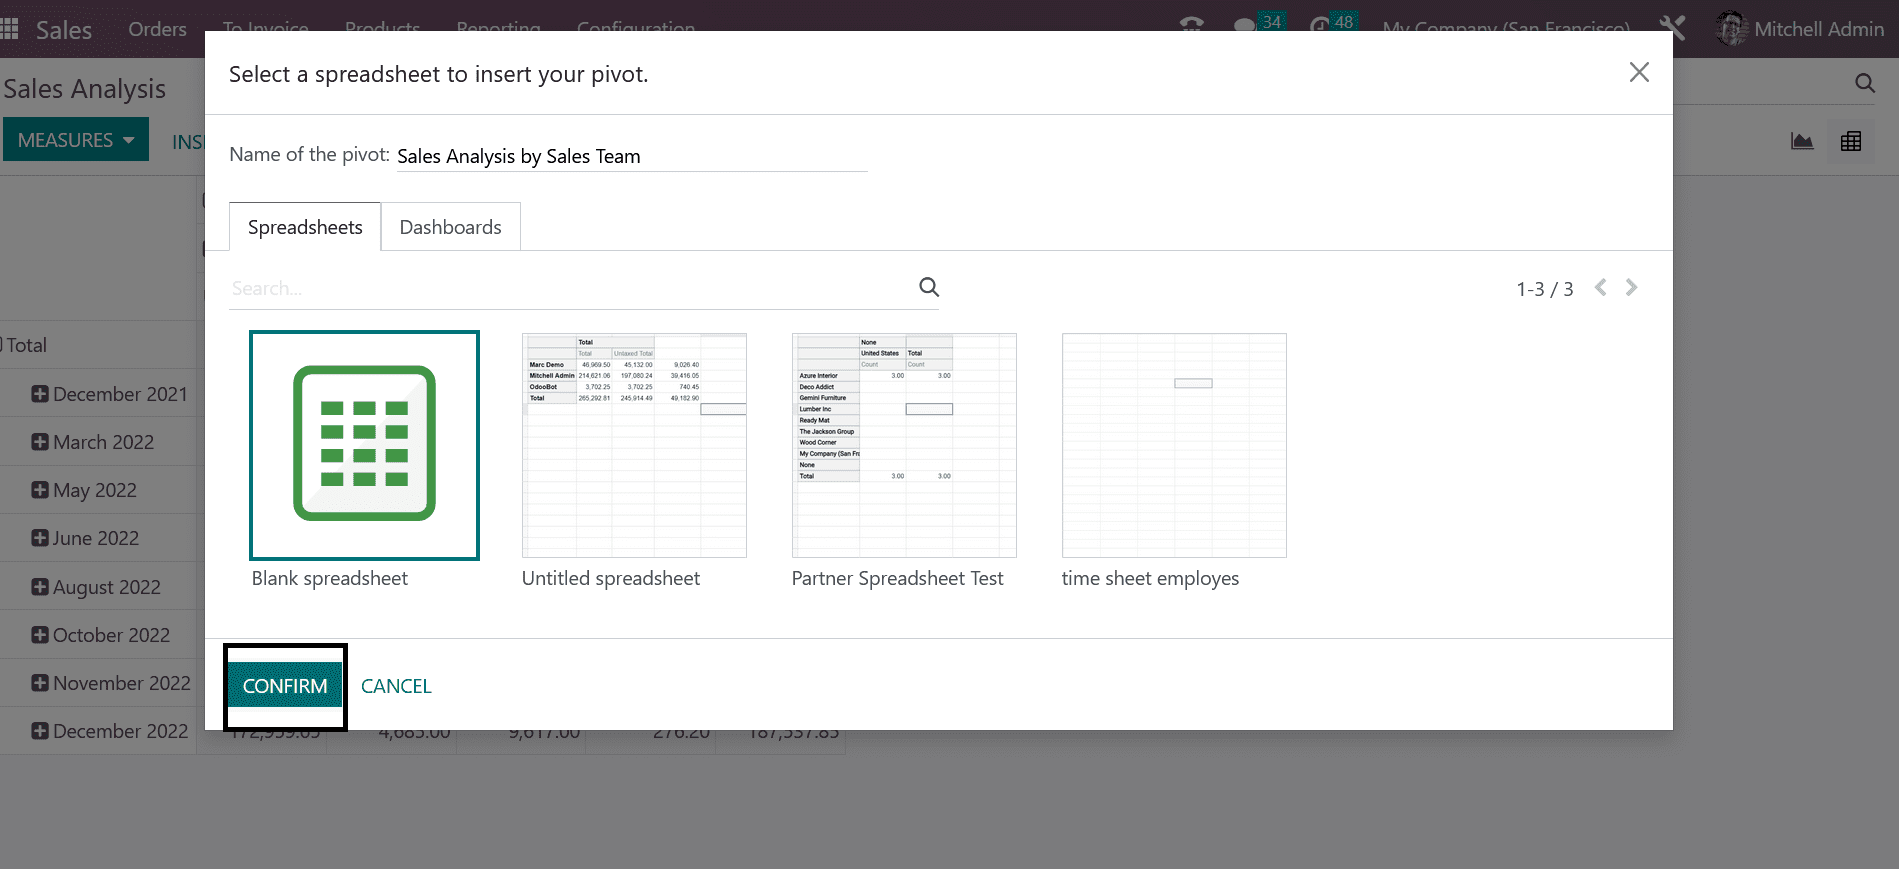 how-to-create-a-report-in-odoo-16-sales-app-8-cybrosys